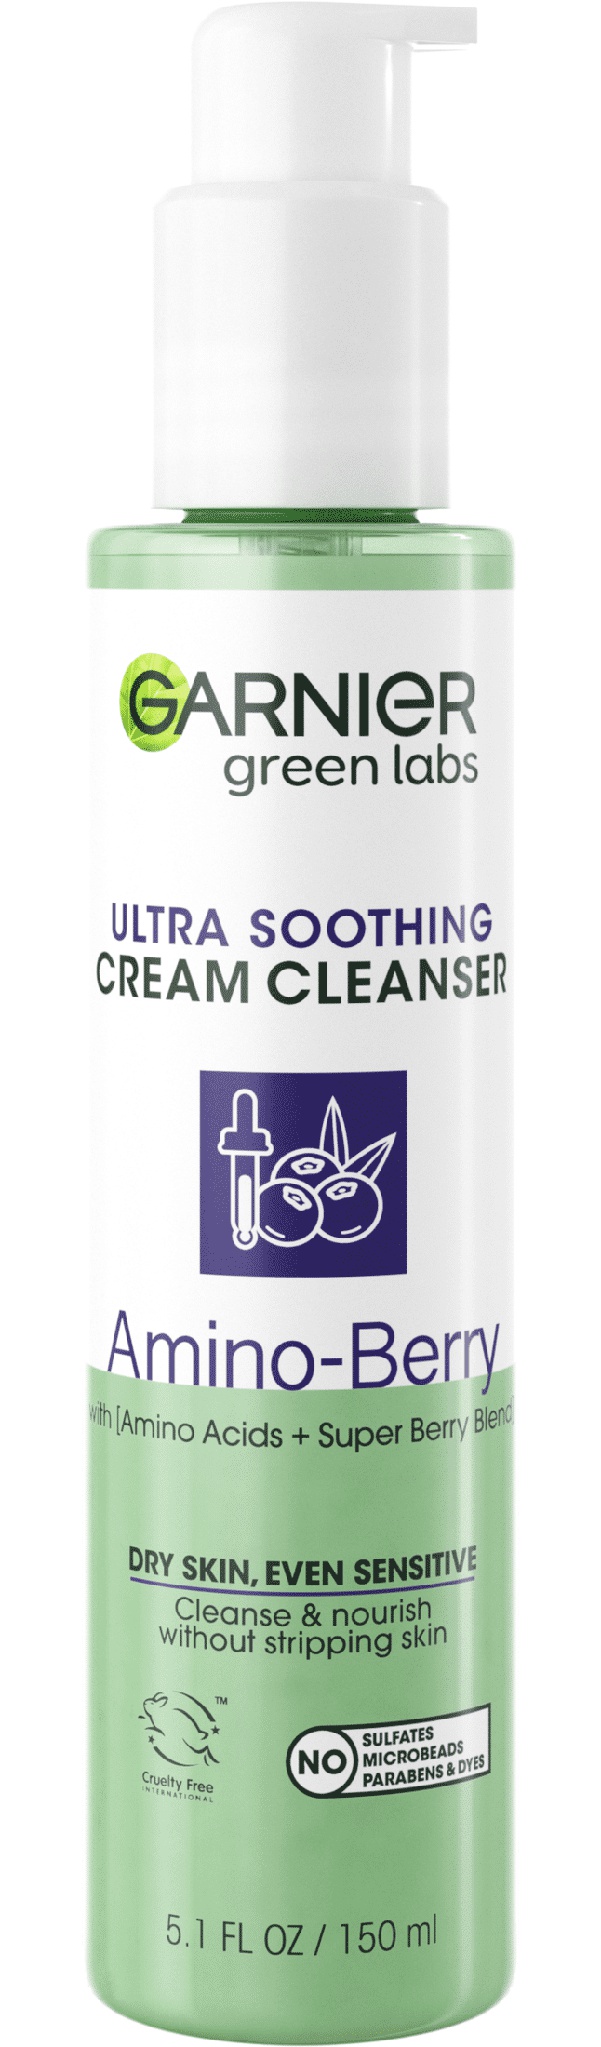 Garnier Green Labs Amino-berry Ultra Soothing Cream Cleanser With Amino Acids + Super Berry Blend